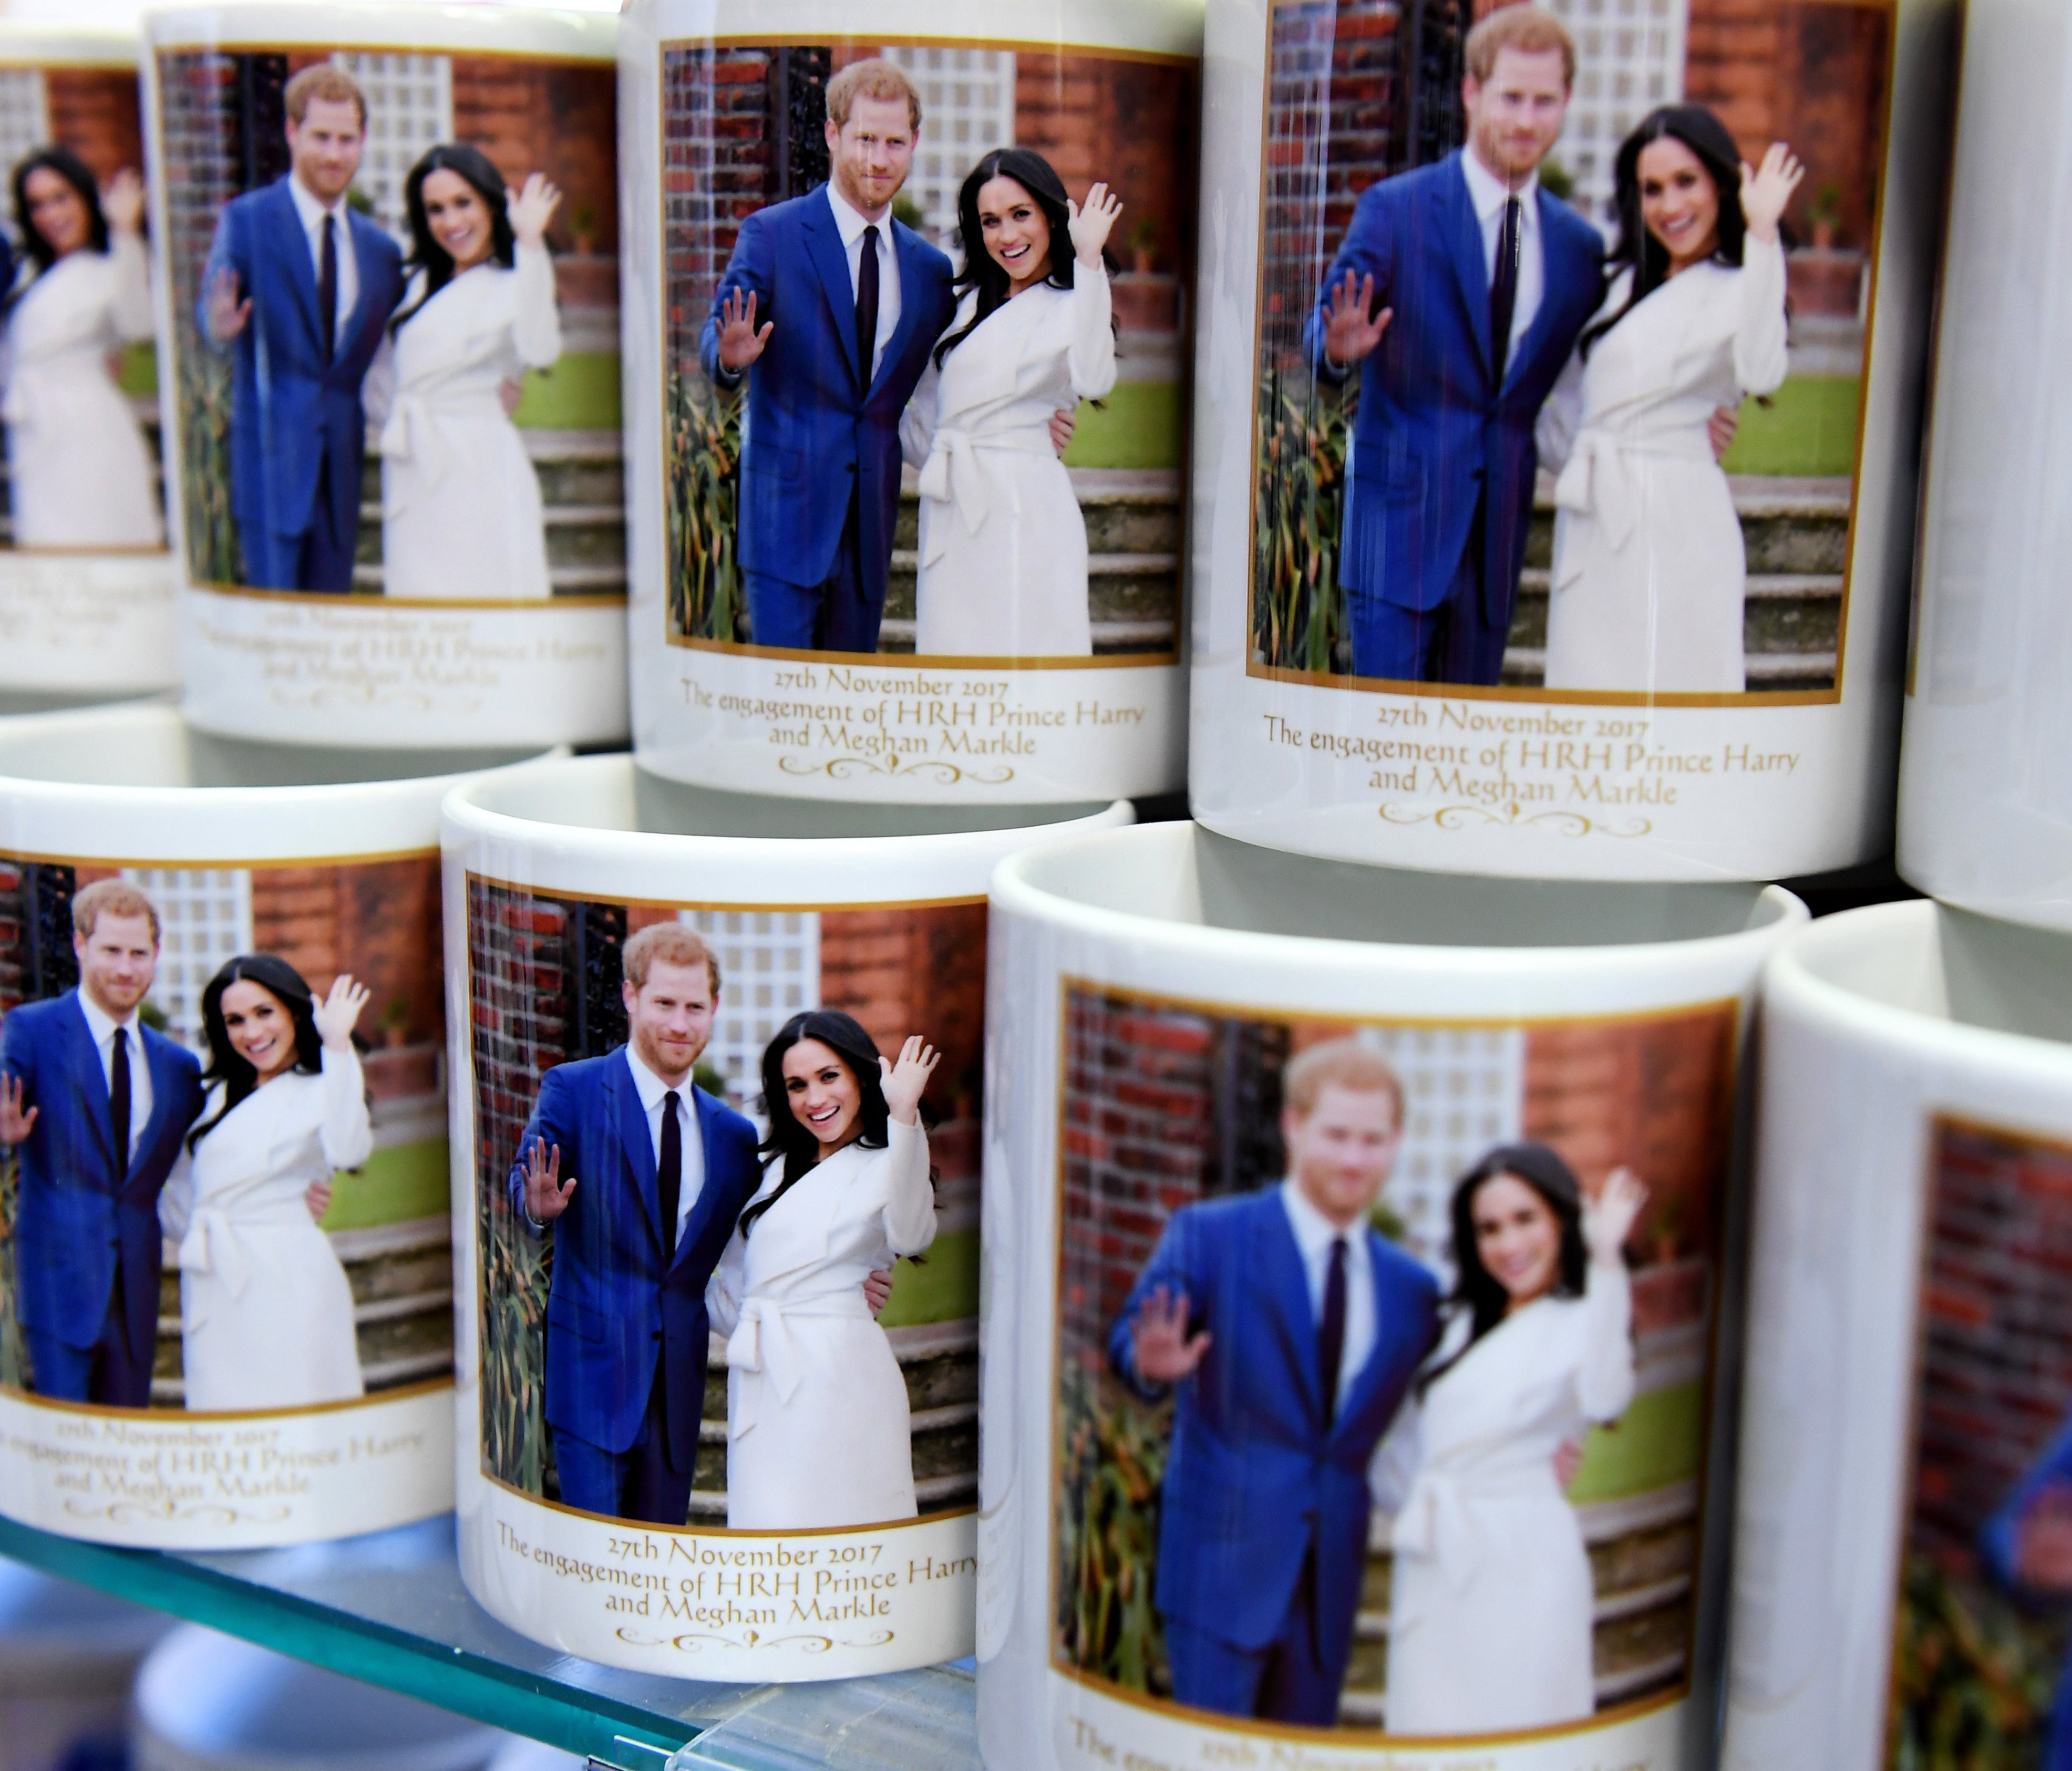 Mugs marking the wedding of Prince Harry and his fiancee Meghan Markle are on display at a souvenir shop in London.